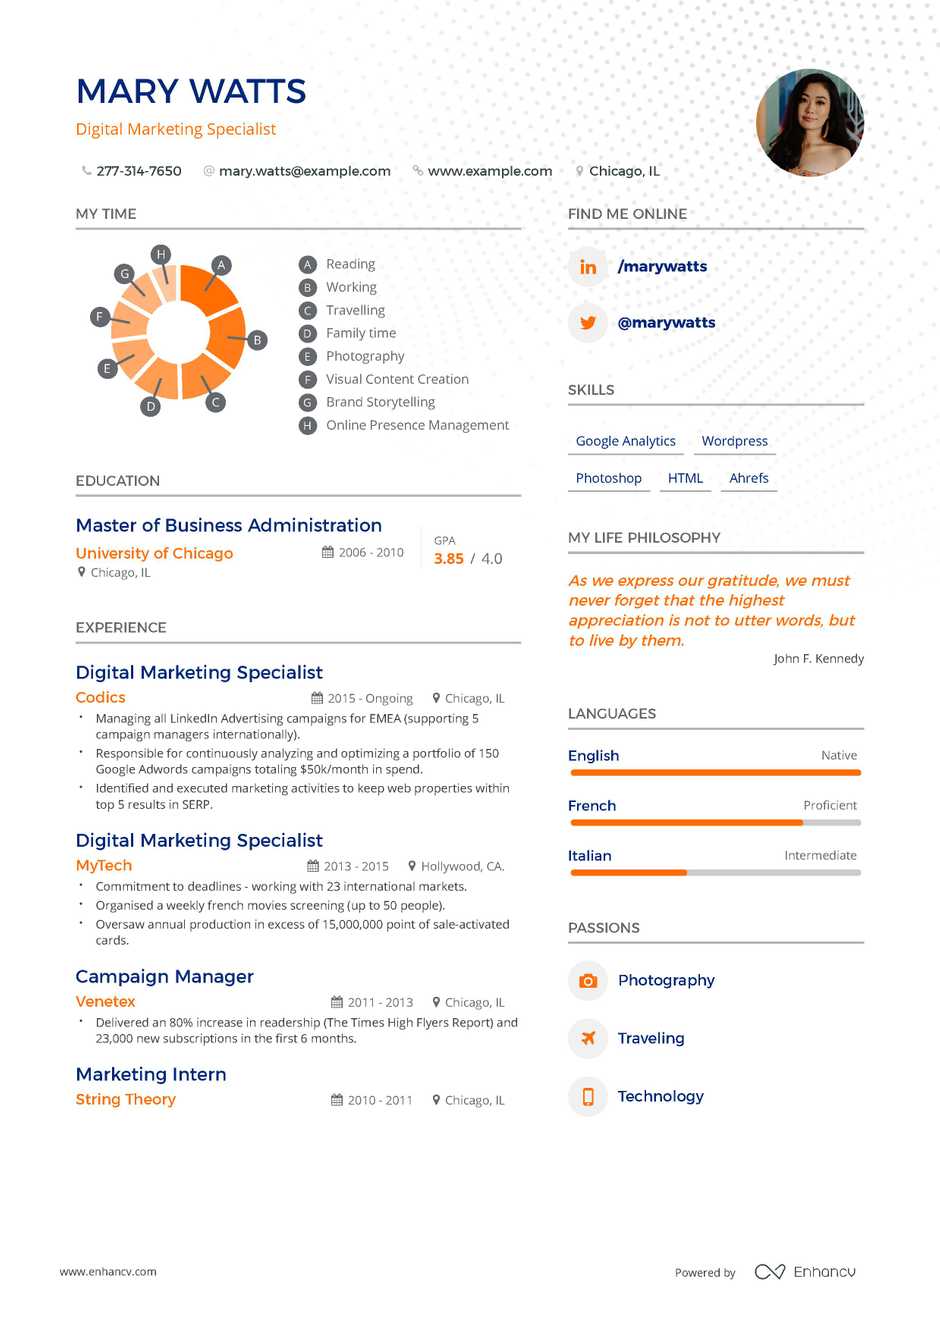 digital marketing resume example and guide for 2019